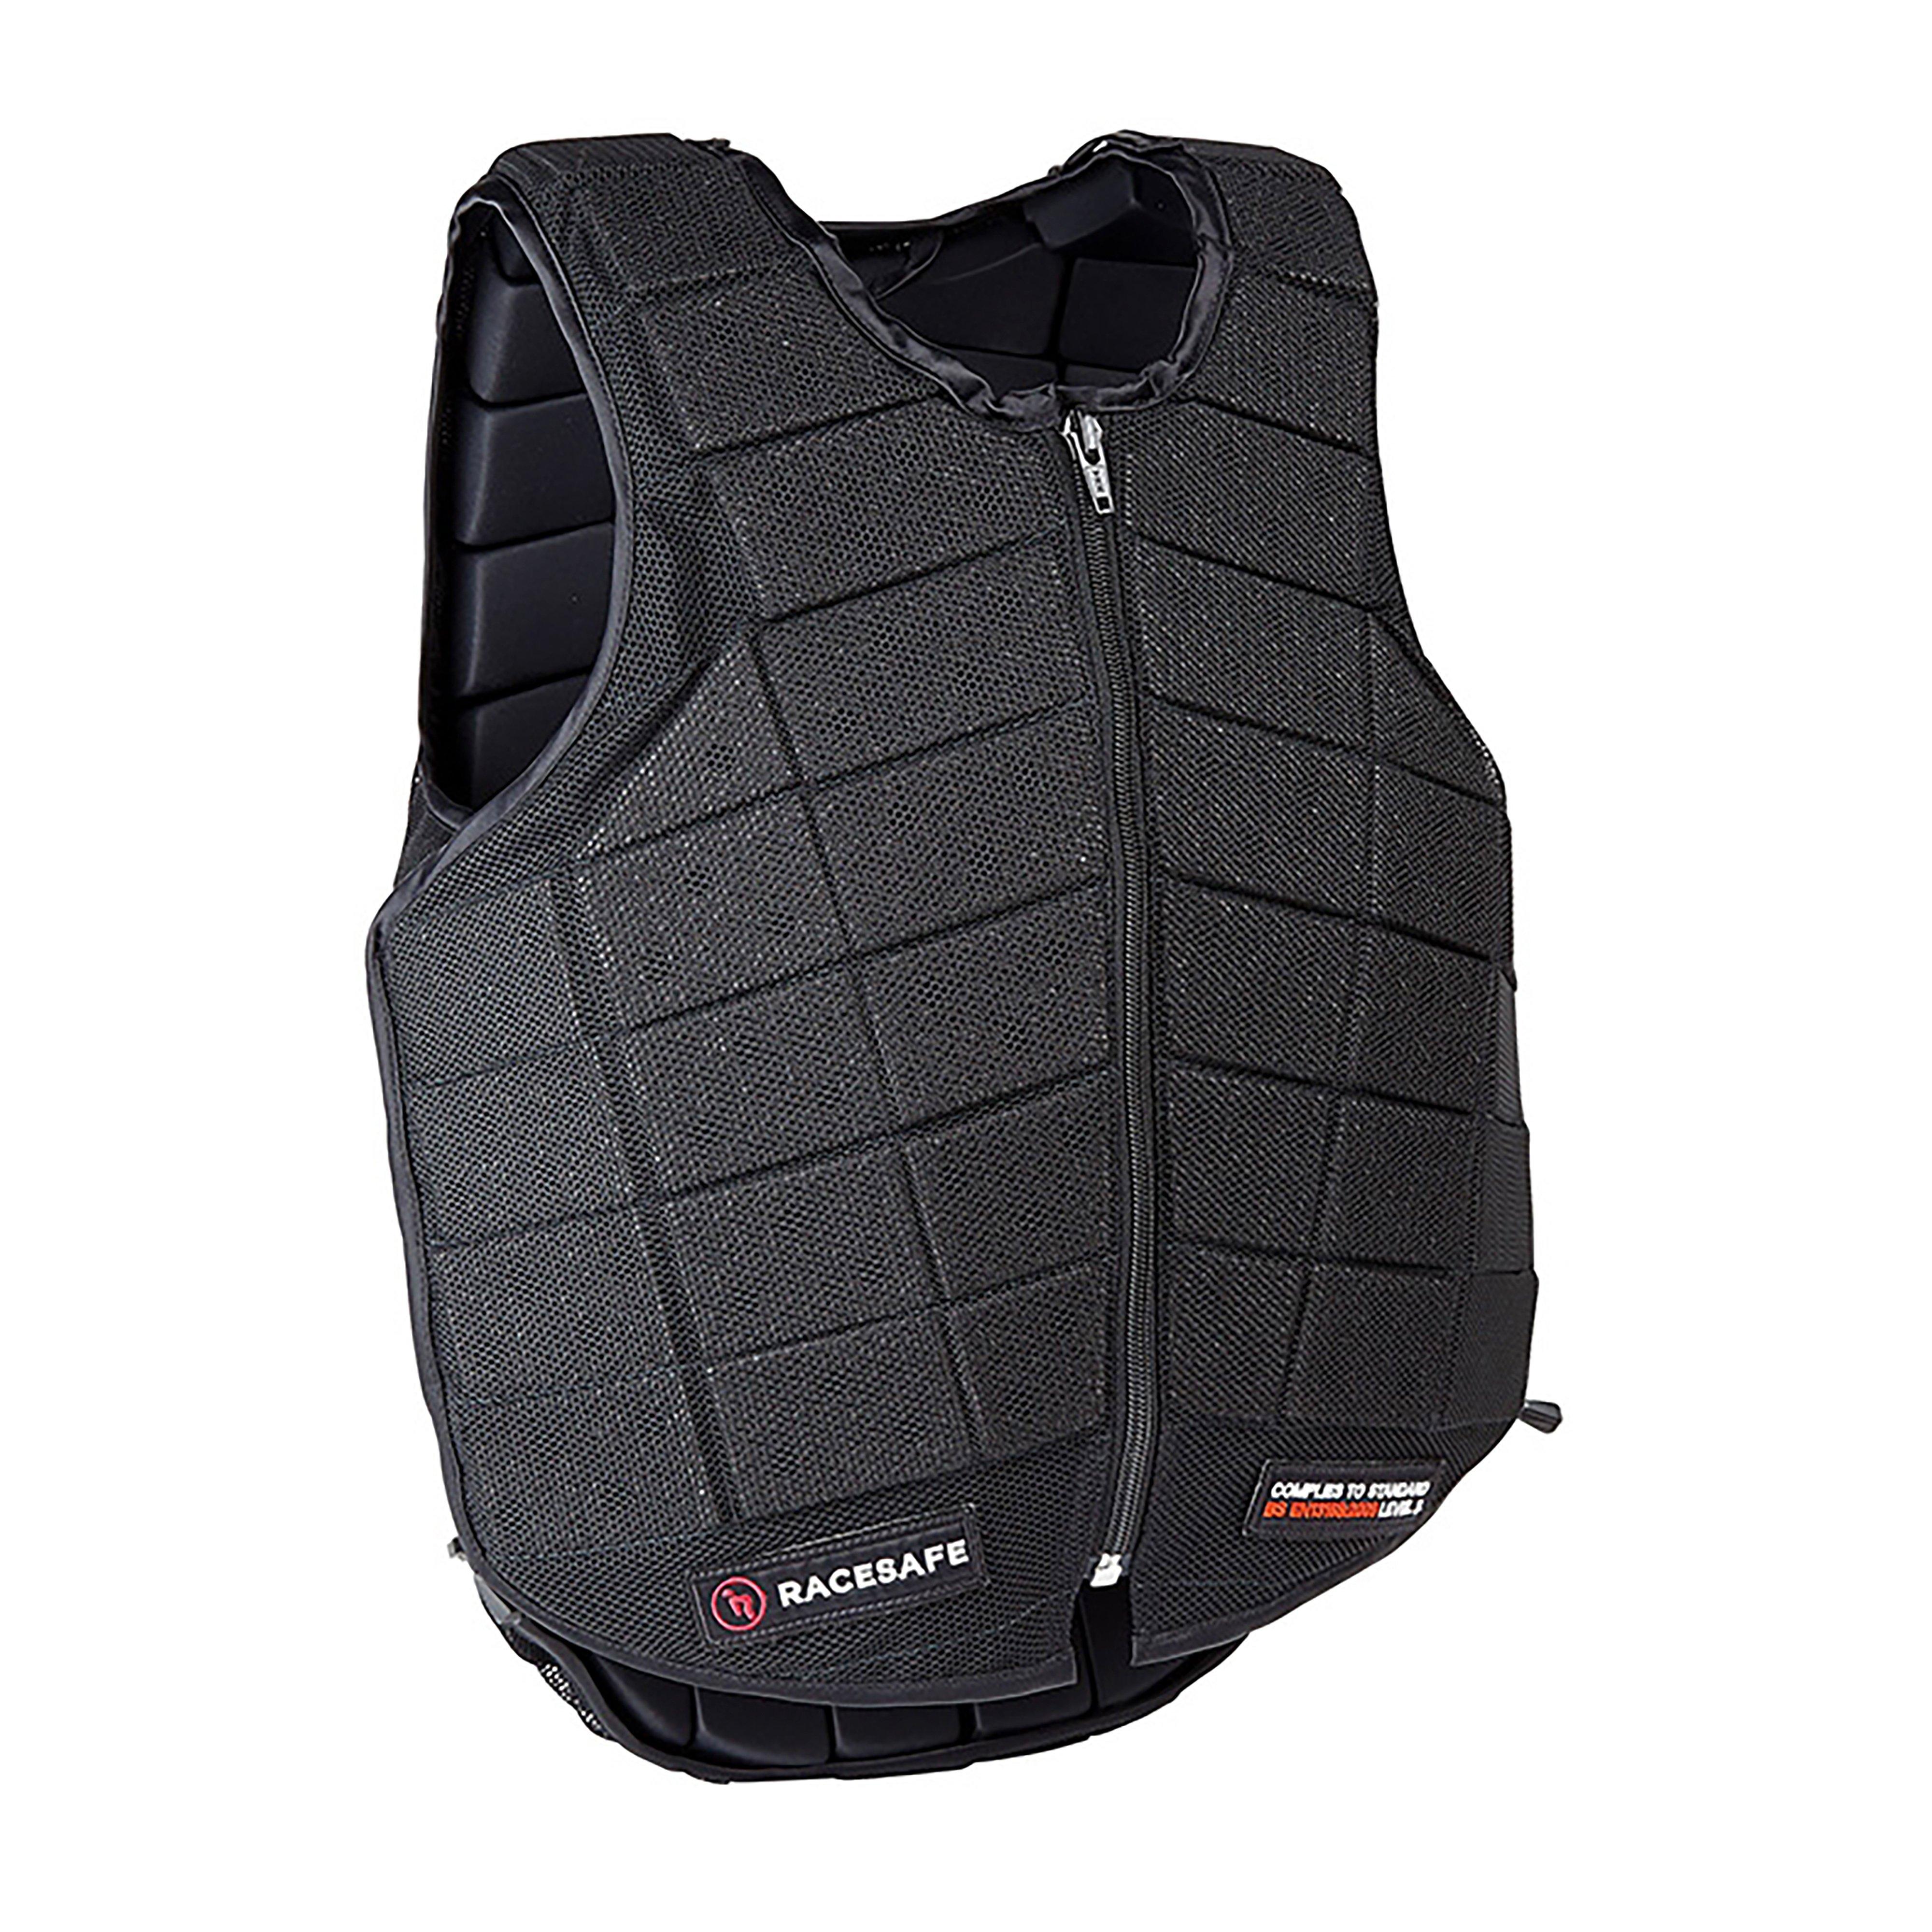 Childs Provent 3.0 Body Protector Black